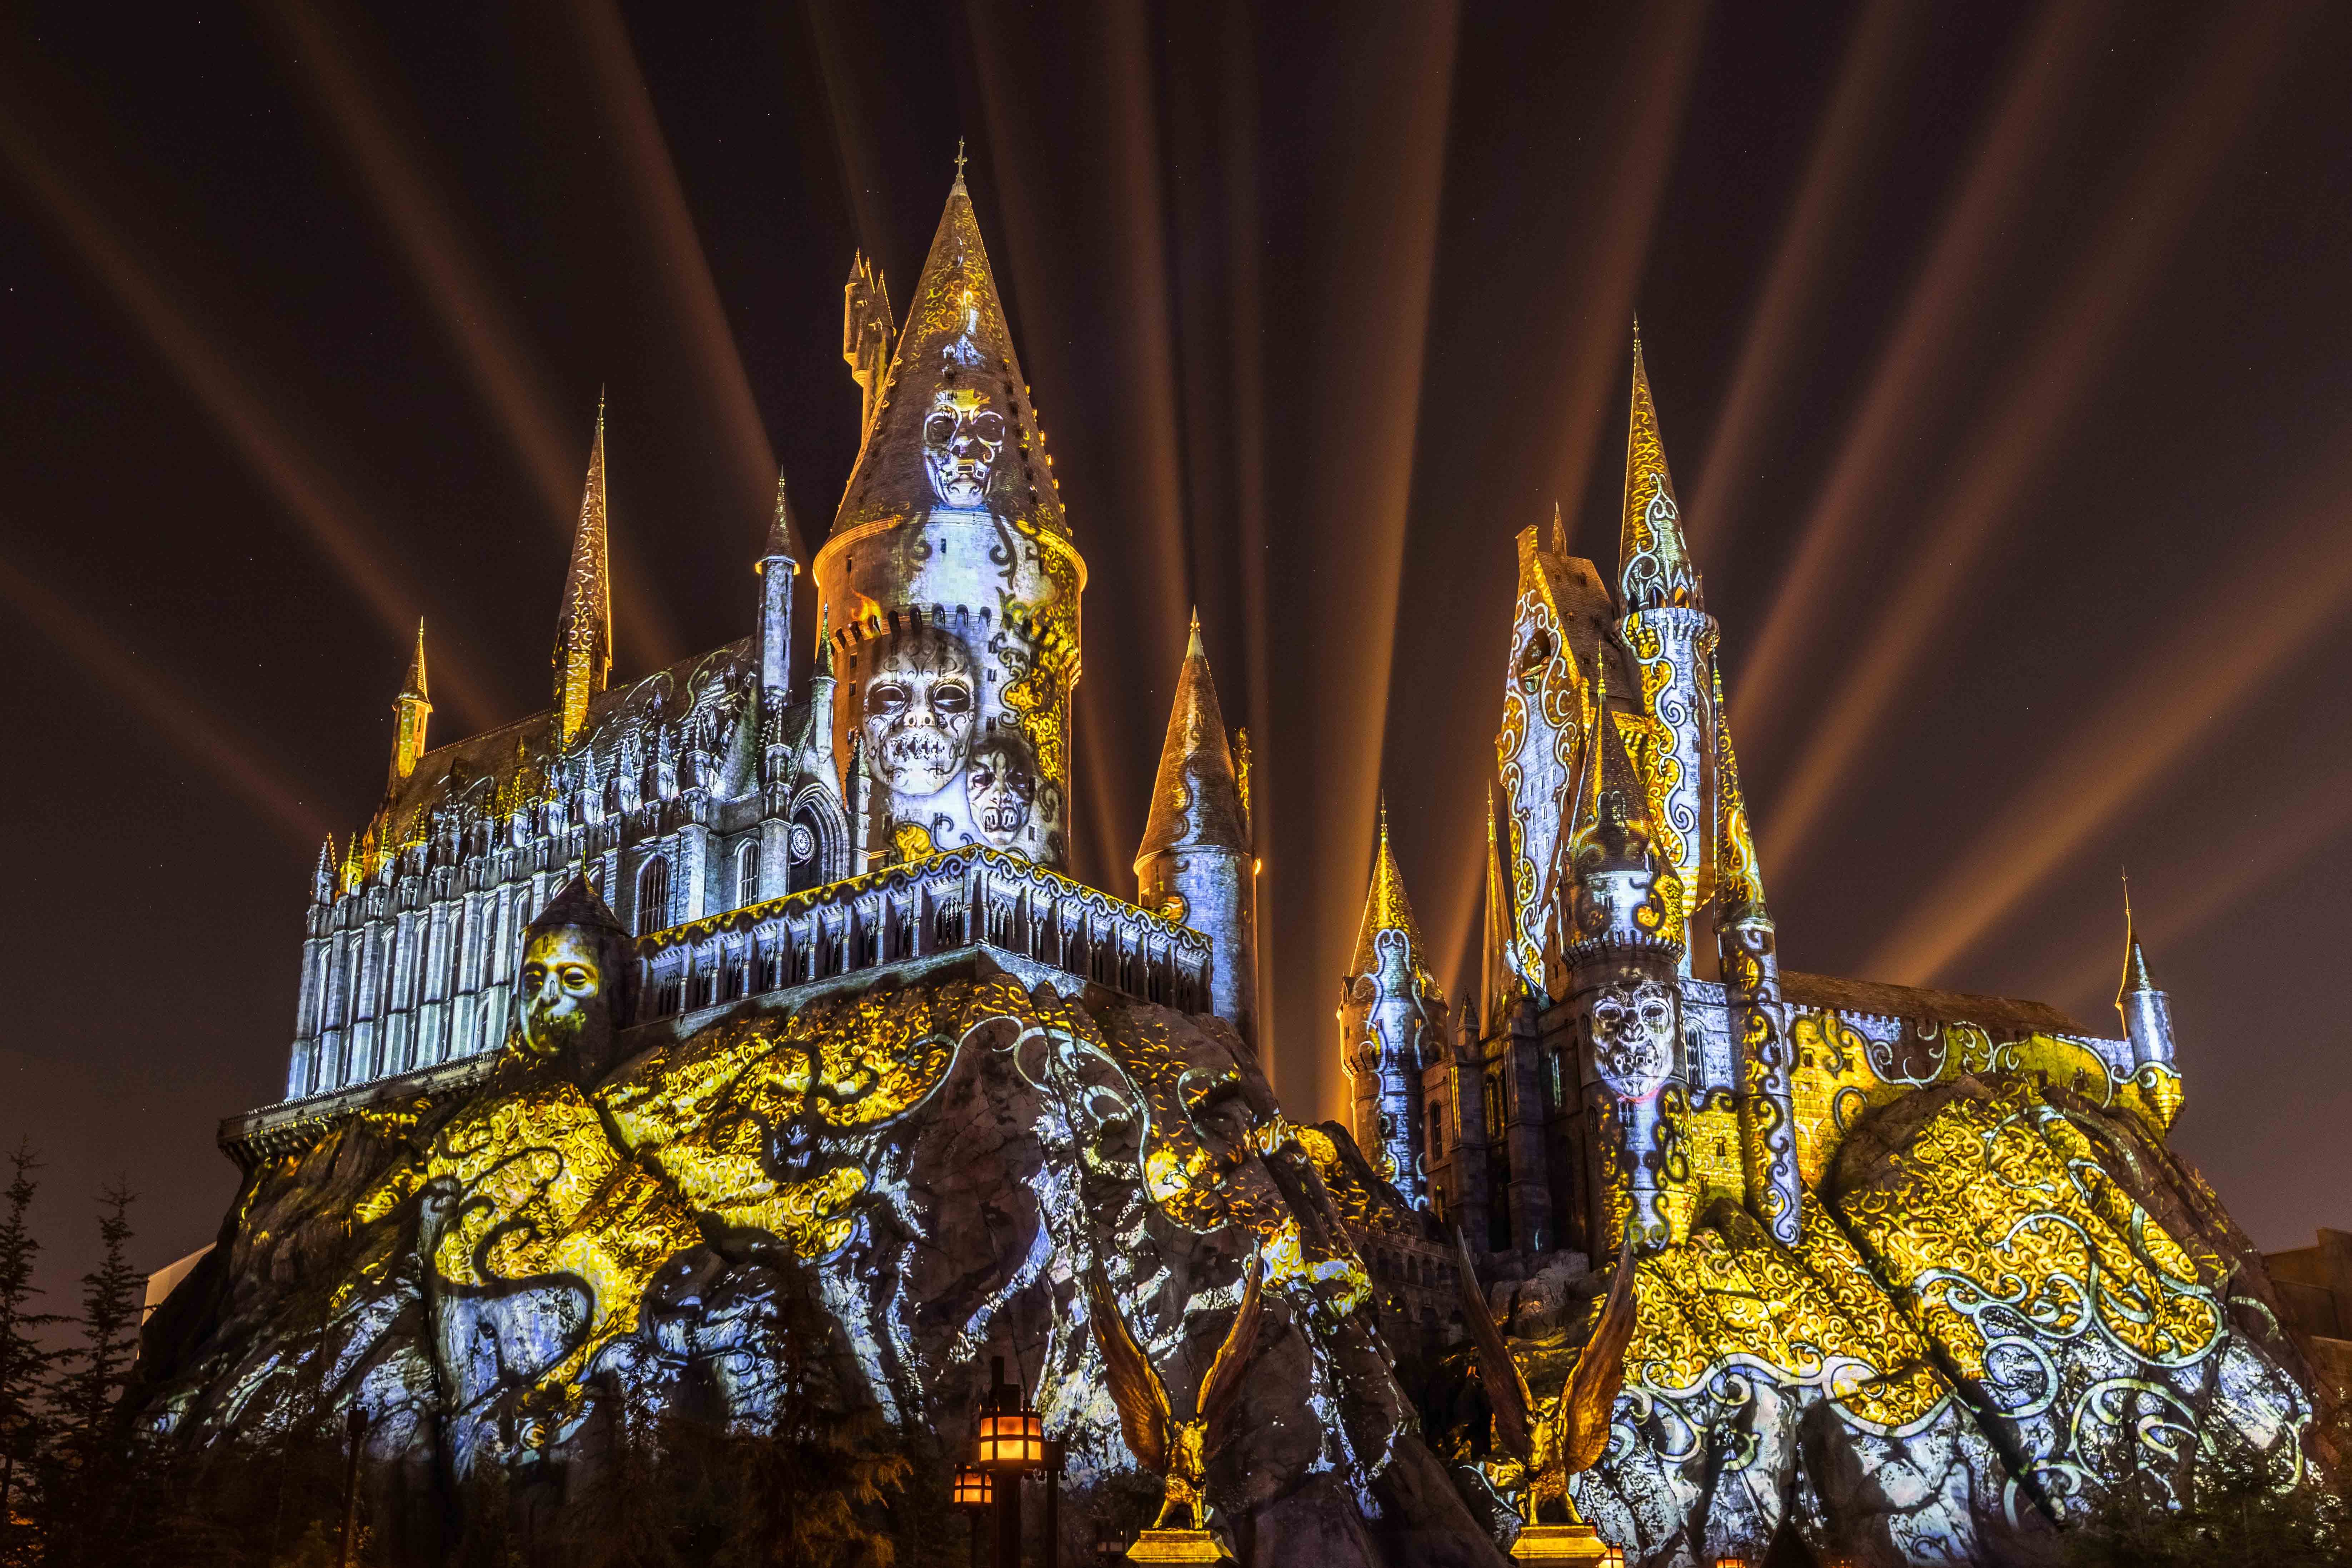 If 'Harry Potter' took place in 2019, here's what Hogwarts would look like